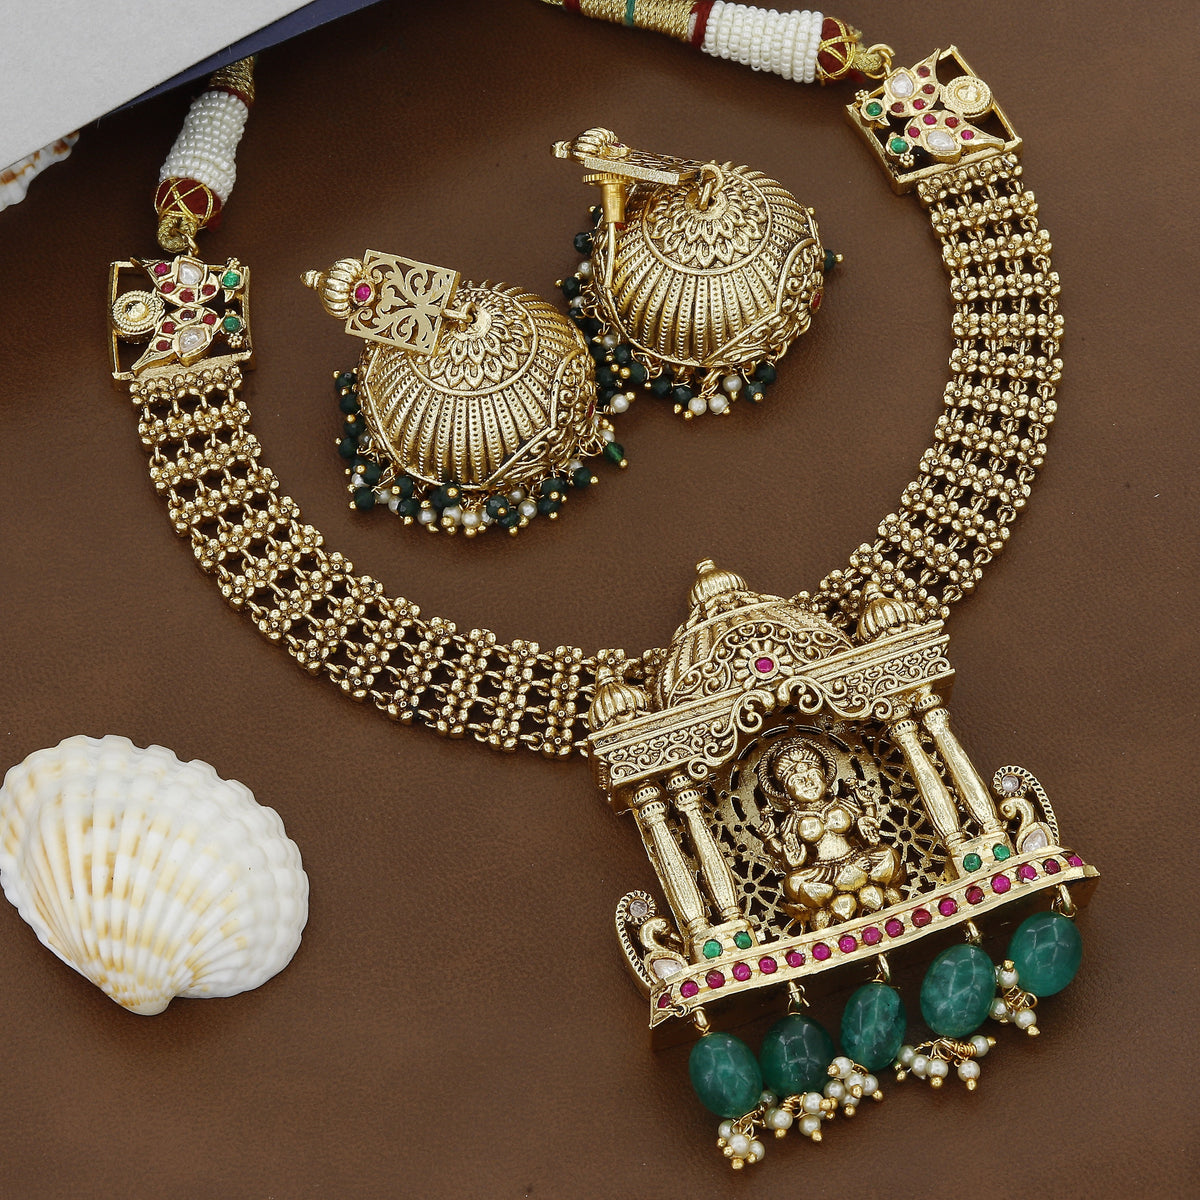 Antique Tample Wear Choker With Earrings